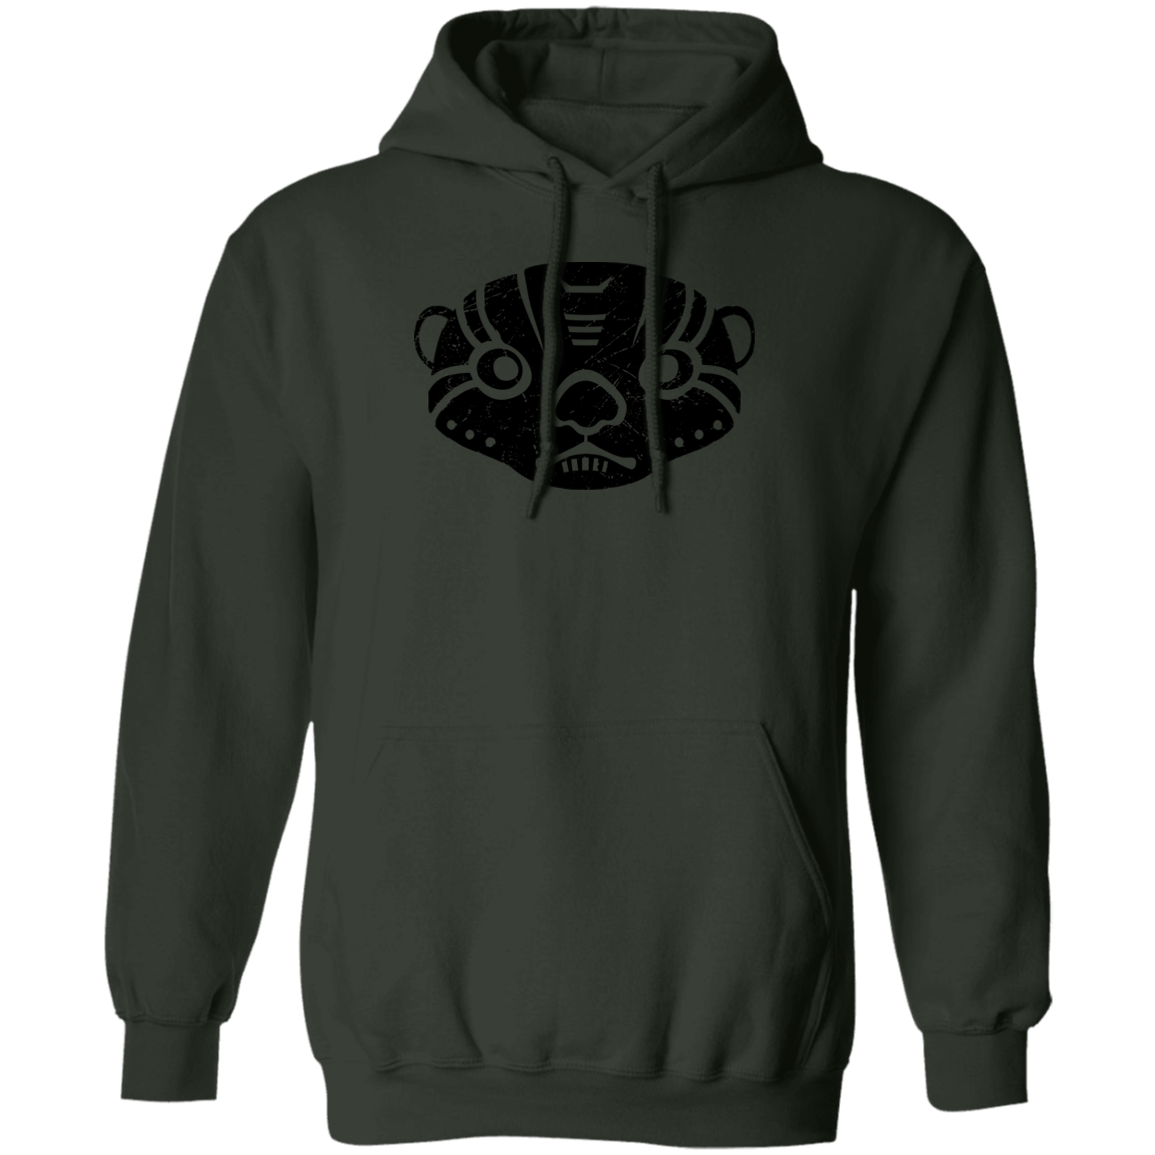 Black Distressed Emblem Hoodies for Adults (Otter/Boxer)